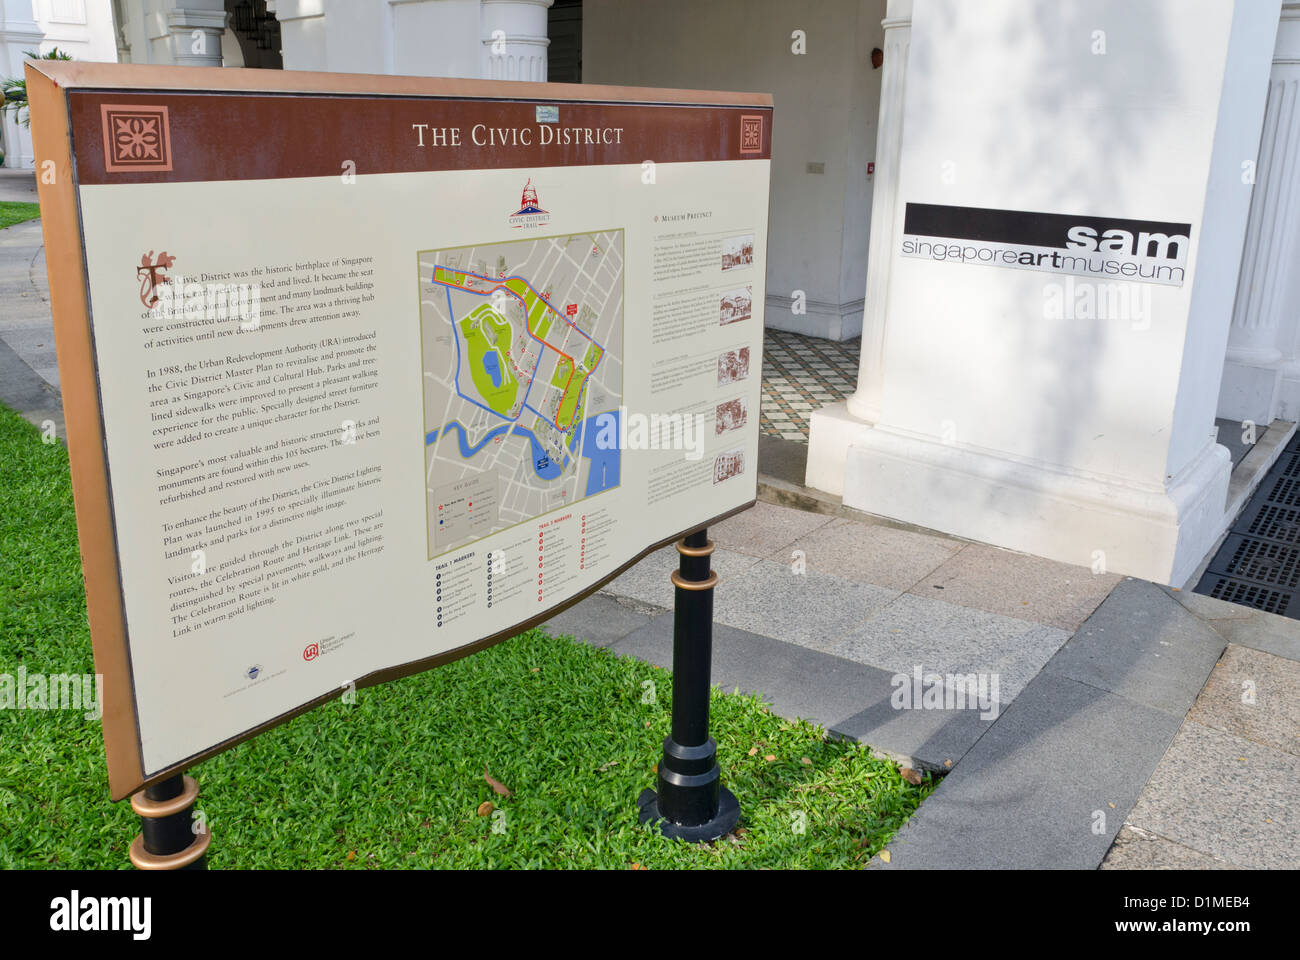 The Civic District information sign outside the Singapore Art Museum Stock Photo